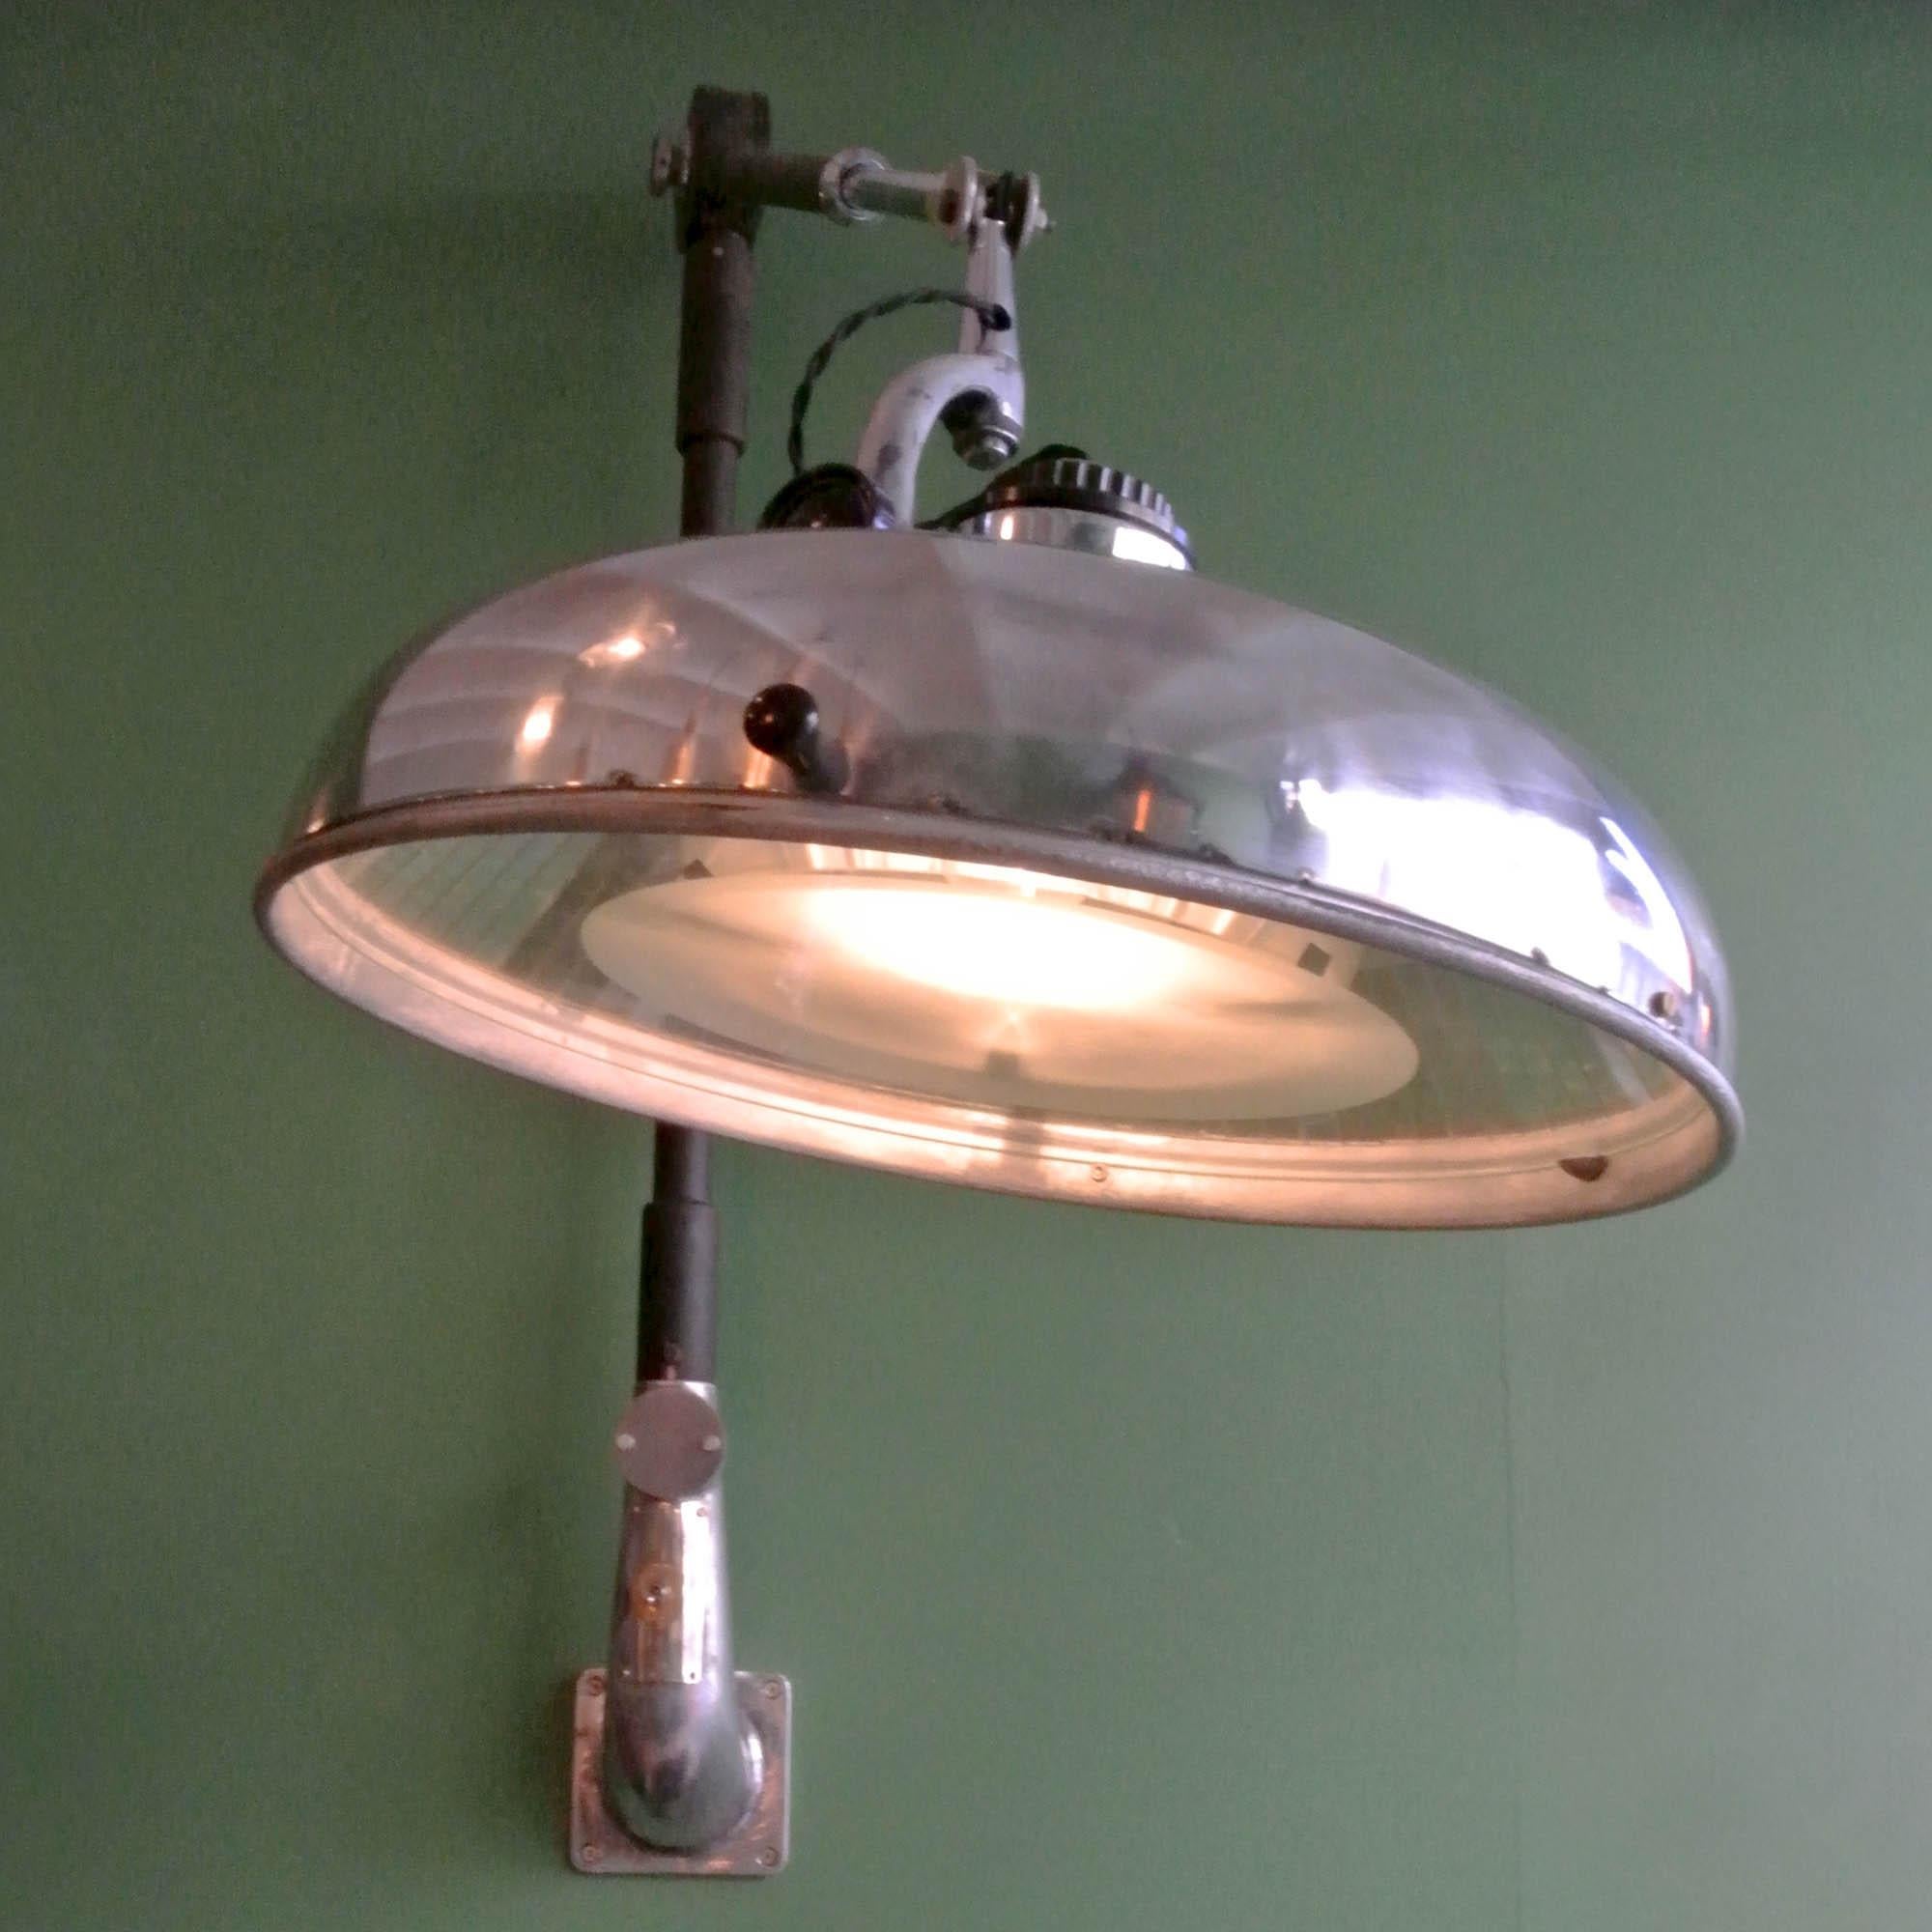 Old operating lamp Scialytique - BBT, formerly used in surgery, fully restored (stripped, polished, patinated and rewired). Swivel head composed of mirrors inside that spreads light uniformly. With no cast shadows, possibility to adjust the lens